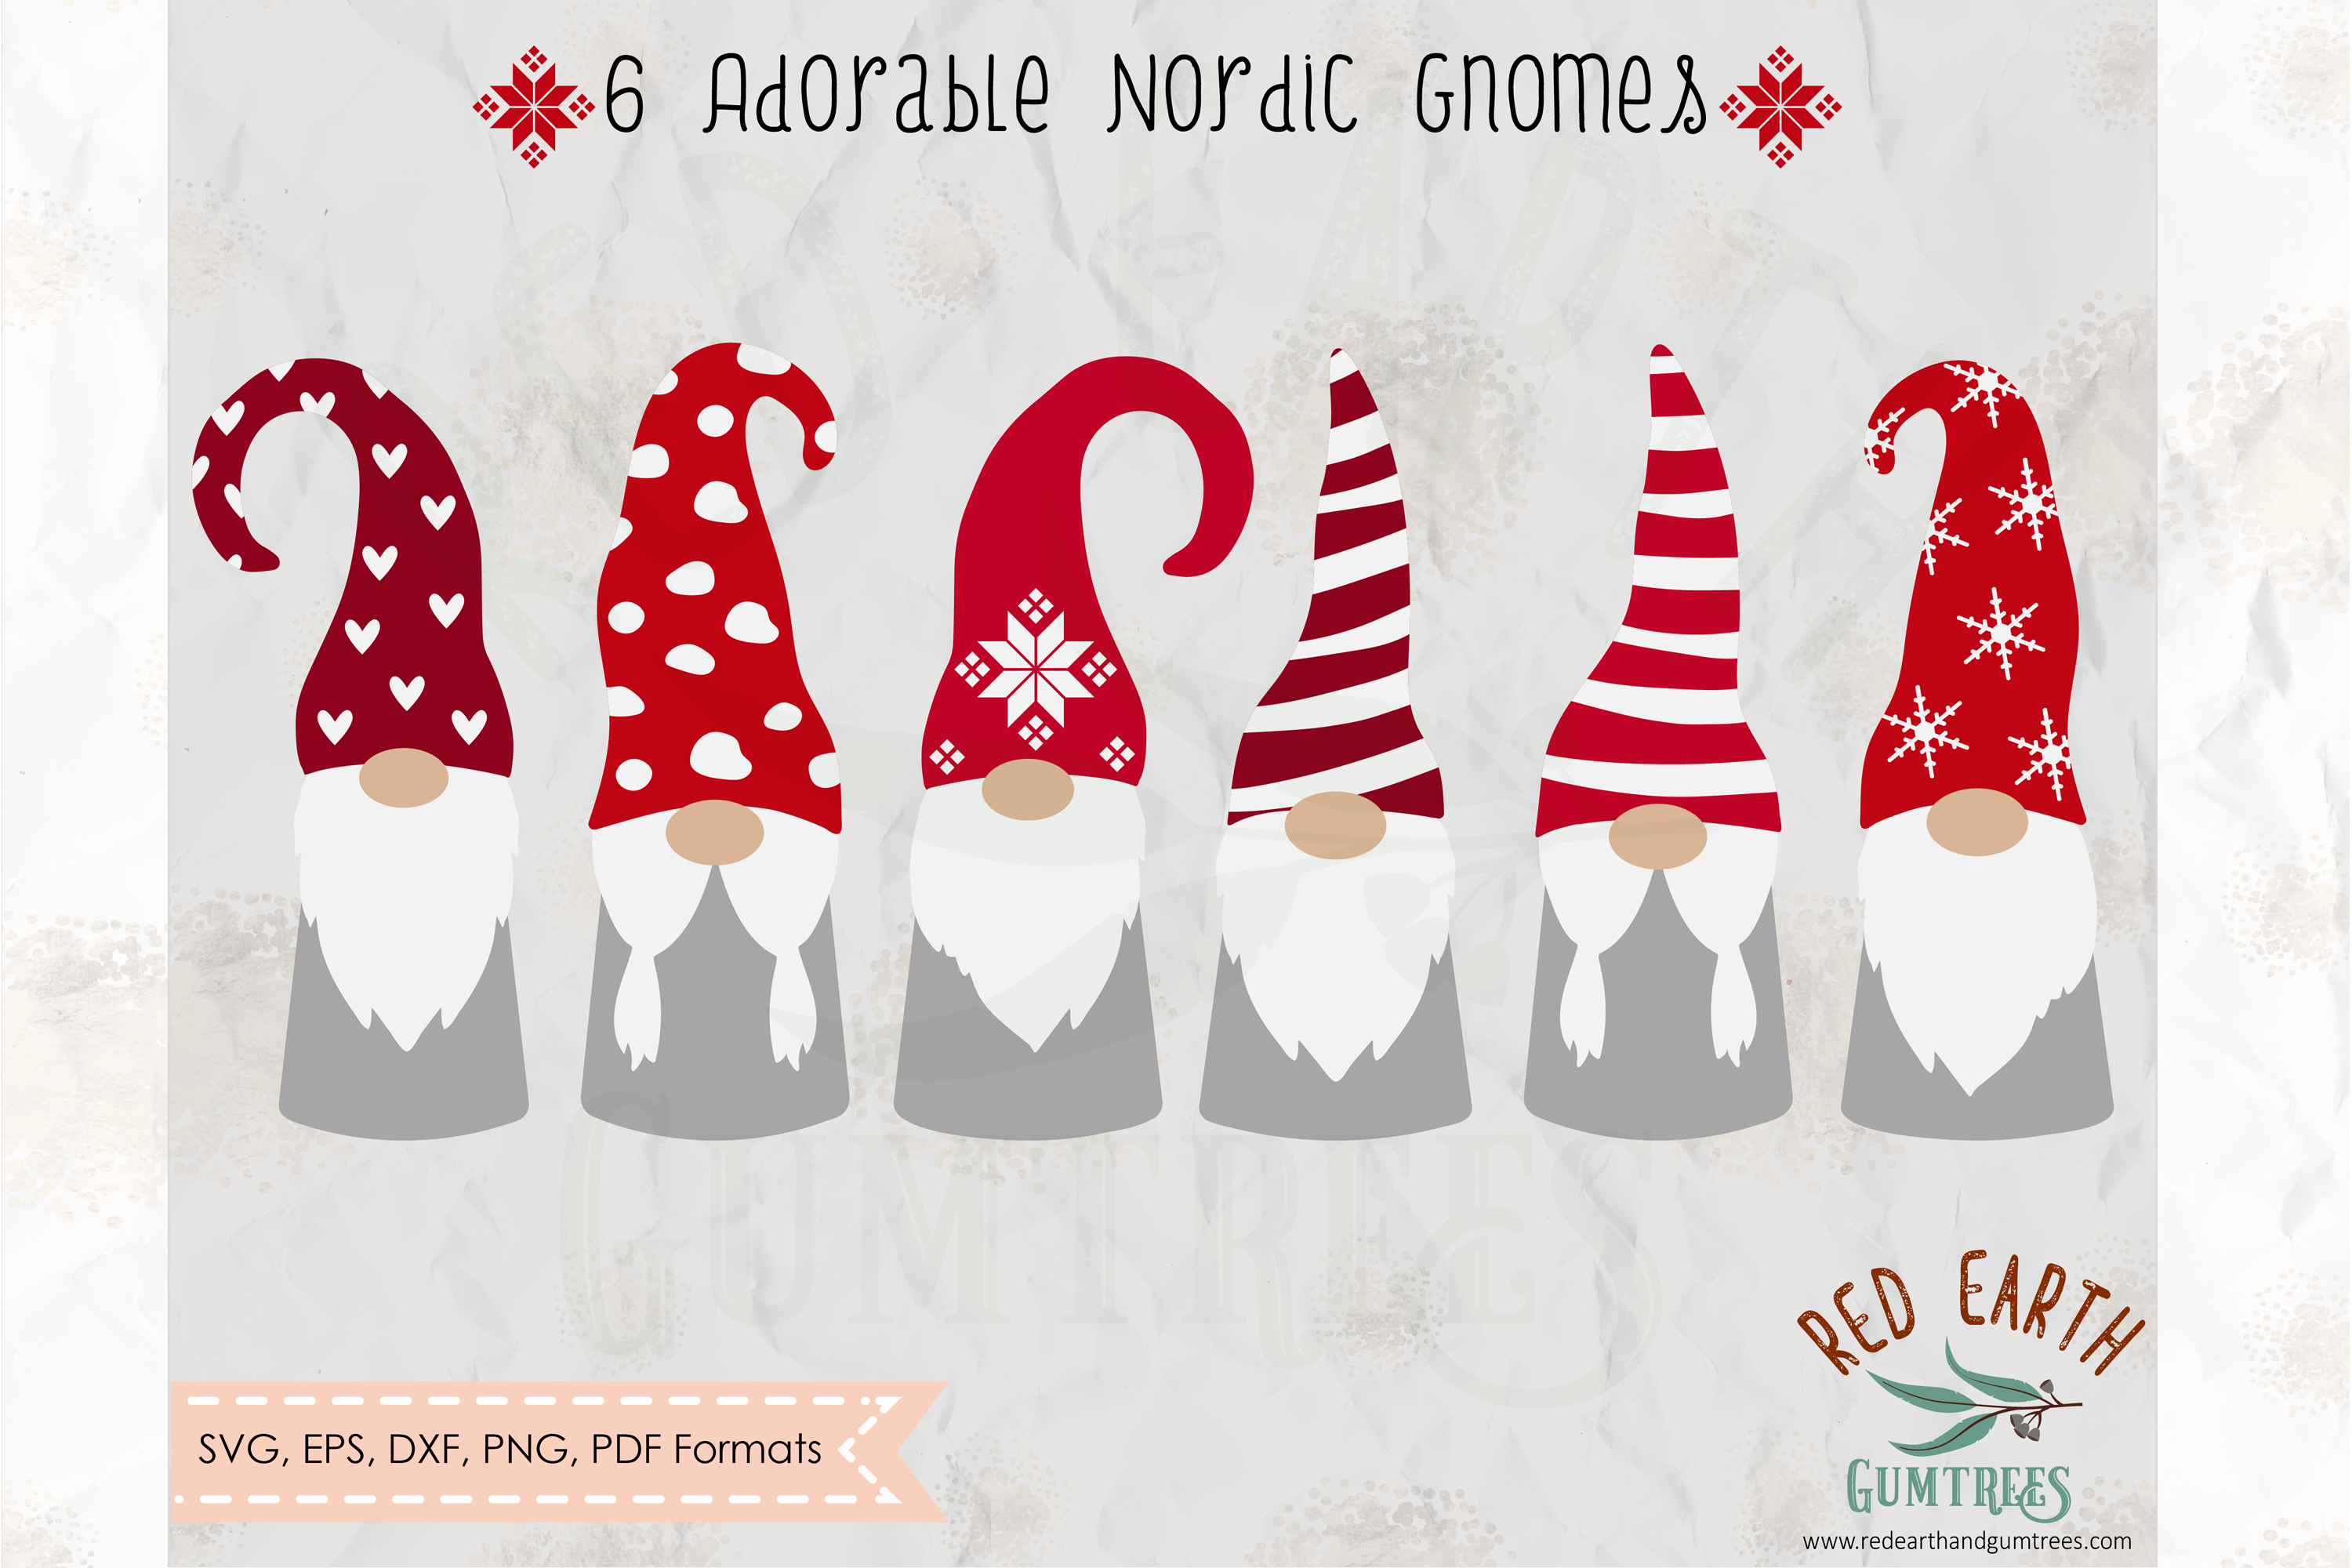 Nordic gnomes bundle,Christmas gnome in SVG,PNG,DXF,PDF,EPS